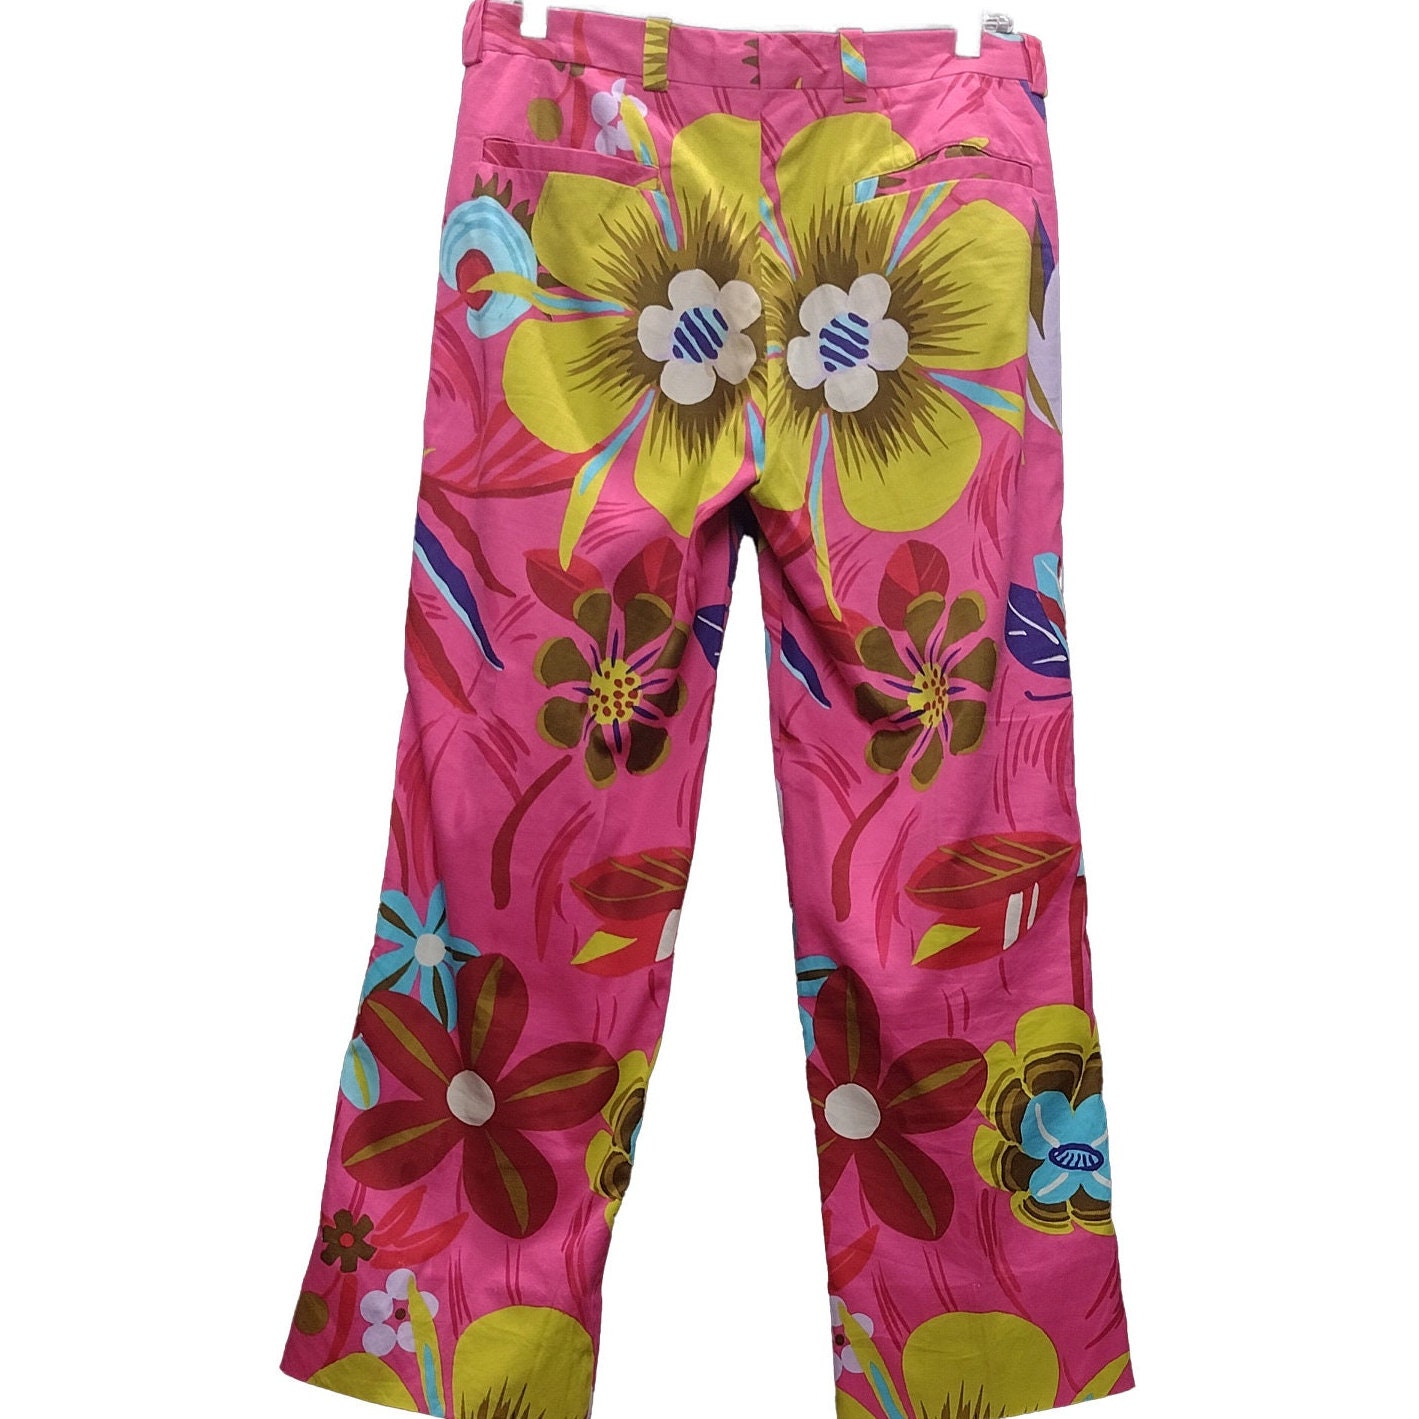 Tom Ford for Gucci Spring/Summer 1999 Floral Pants – THE WAY WE WORE